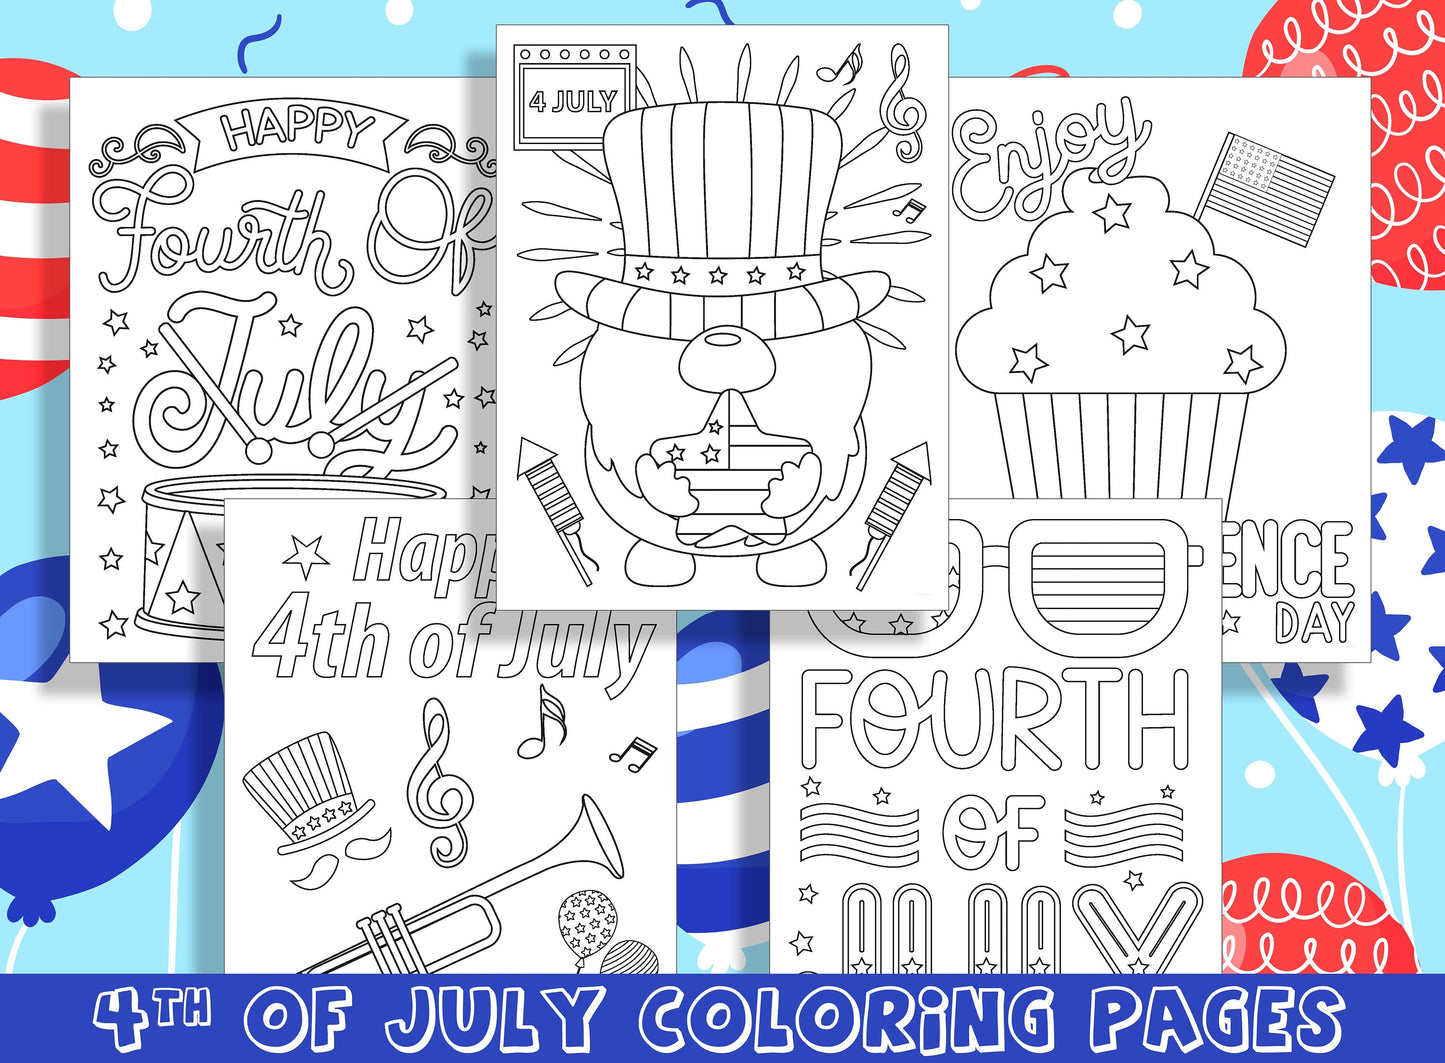 15 Patriotic Coloring Pages to Celebrate the 4th of July: Independence Day Fun for All Ages! PDF File, Instant Download